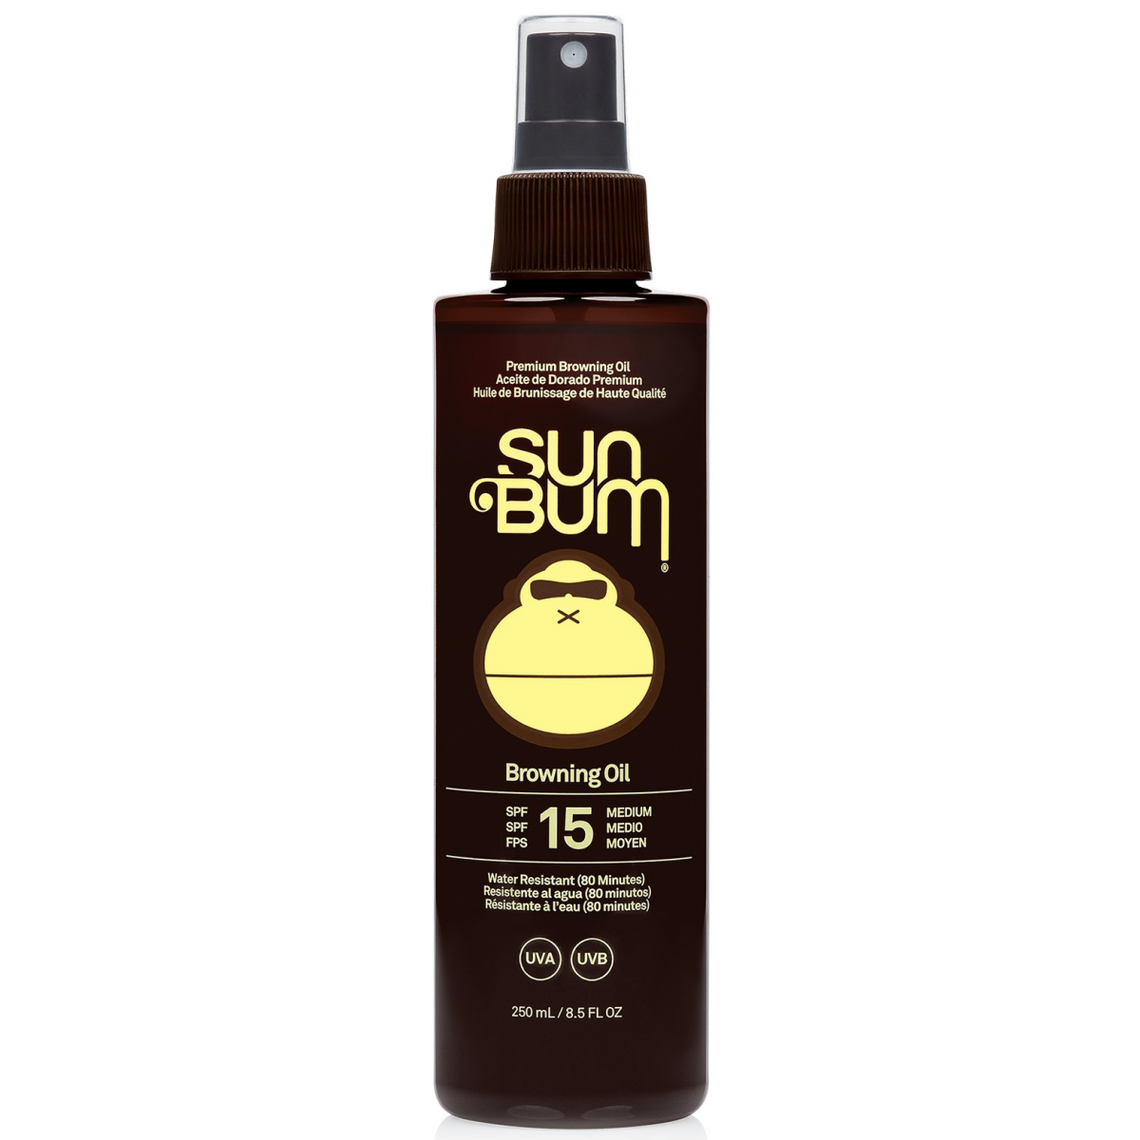 Huile De Bronzage Protectrice Spf 15 - Browning Oil